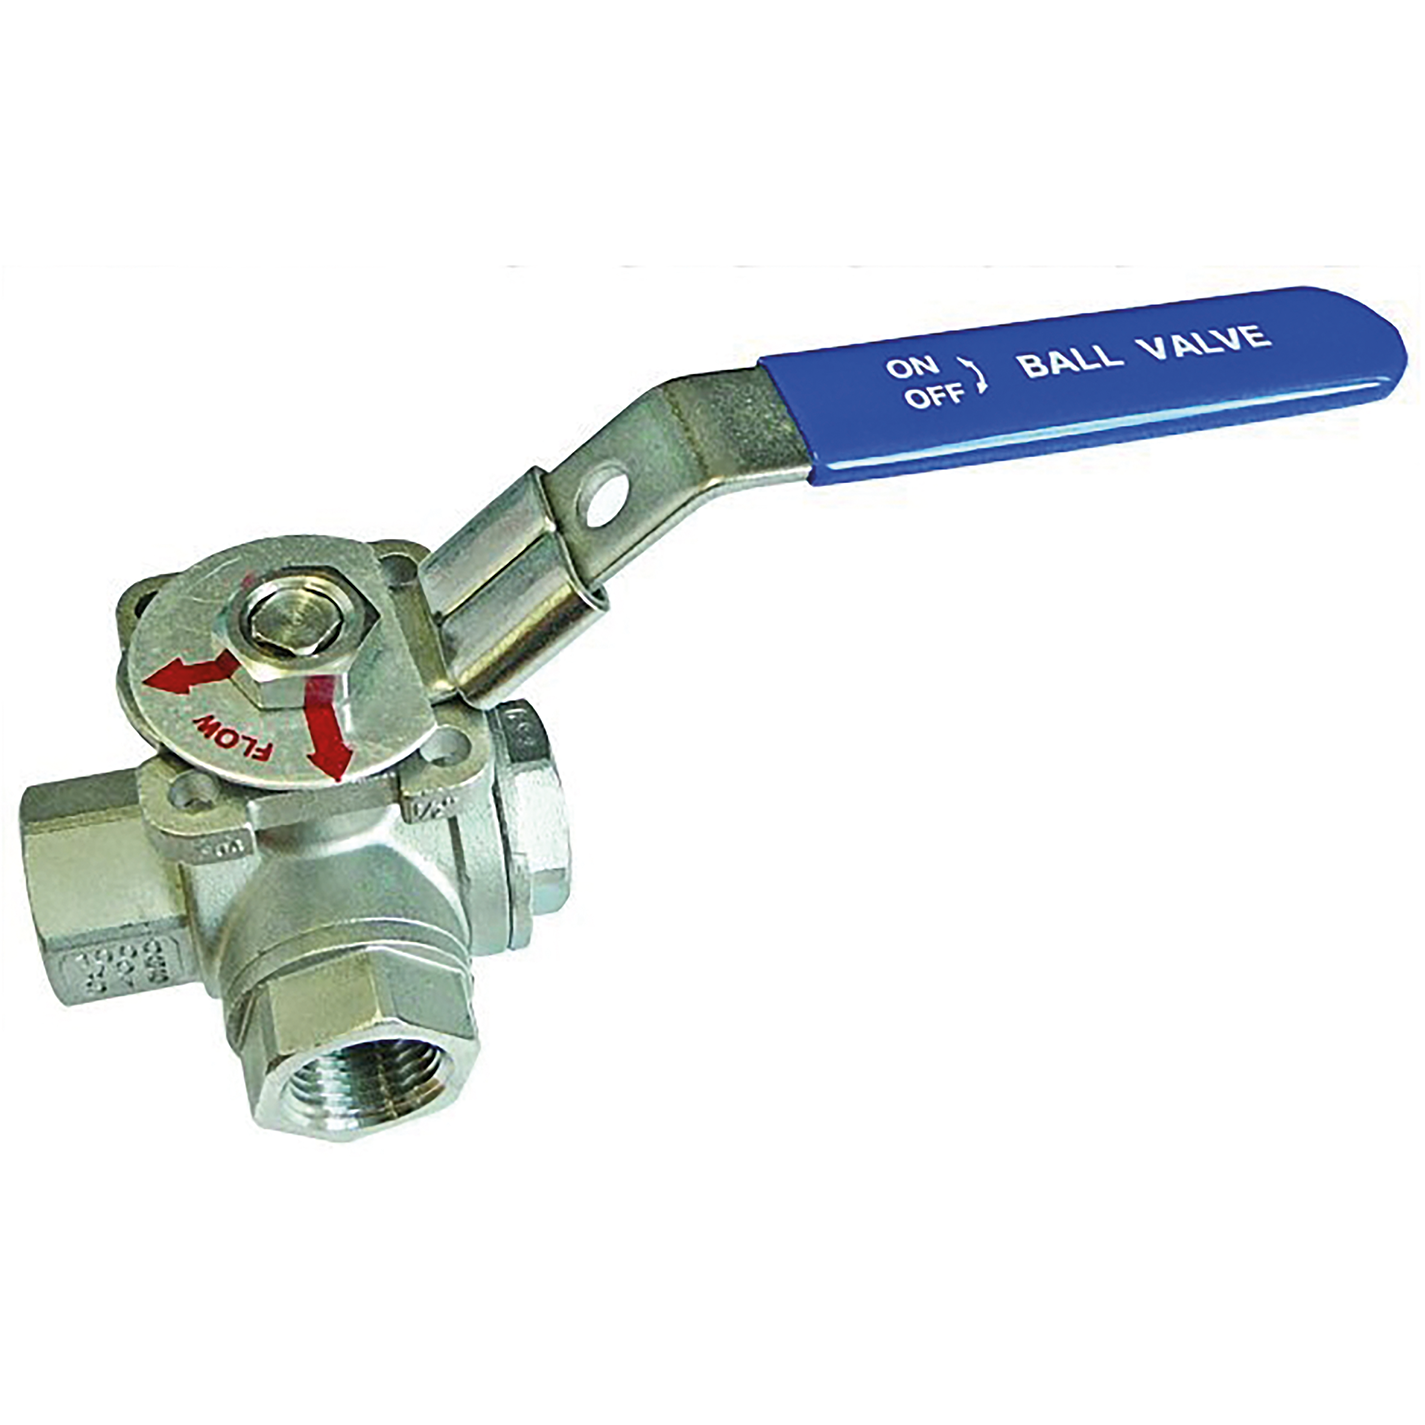 3/8" BSPP Female 3-Way L Ported Ball Valve